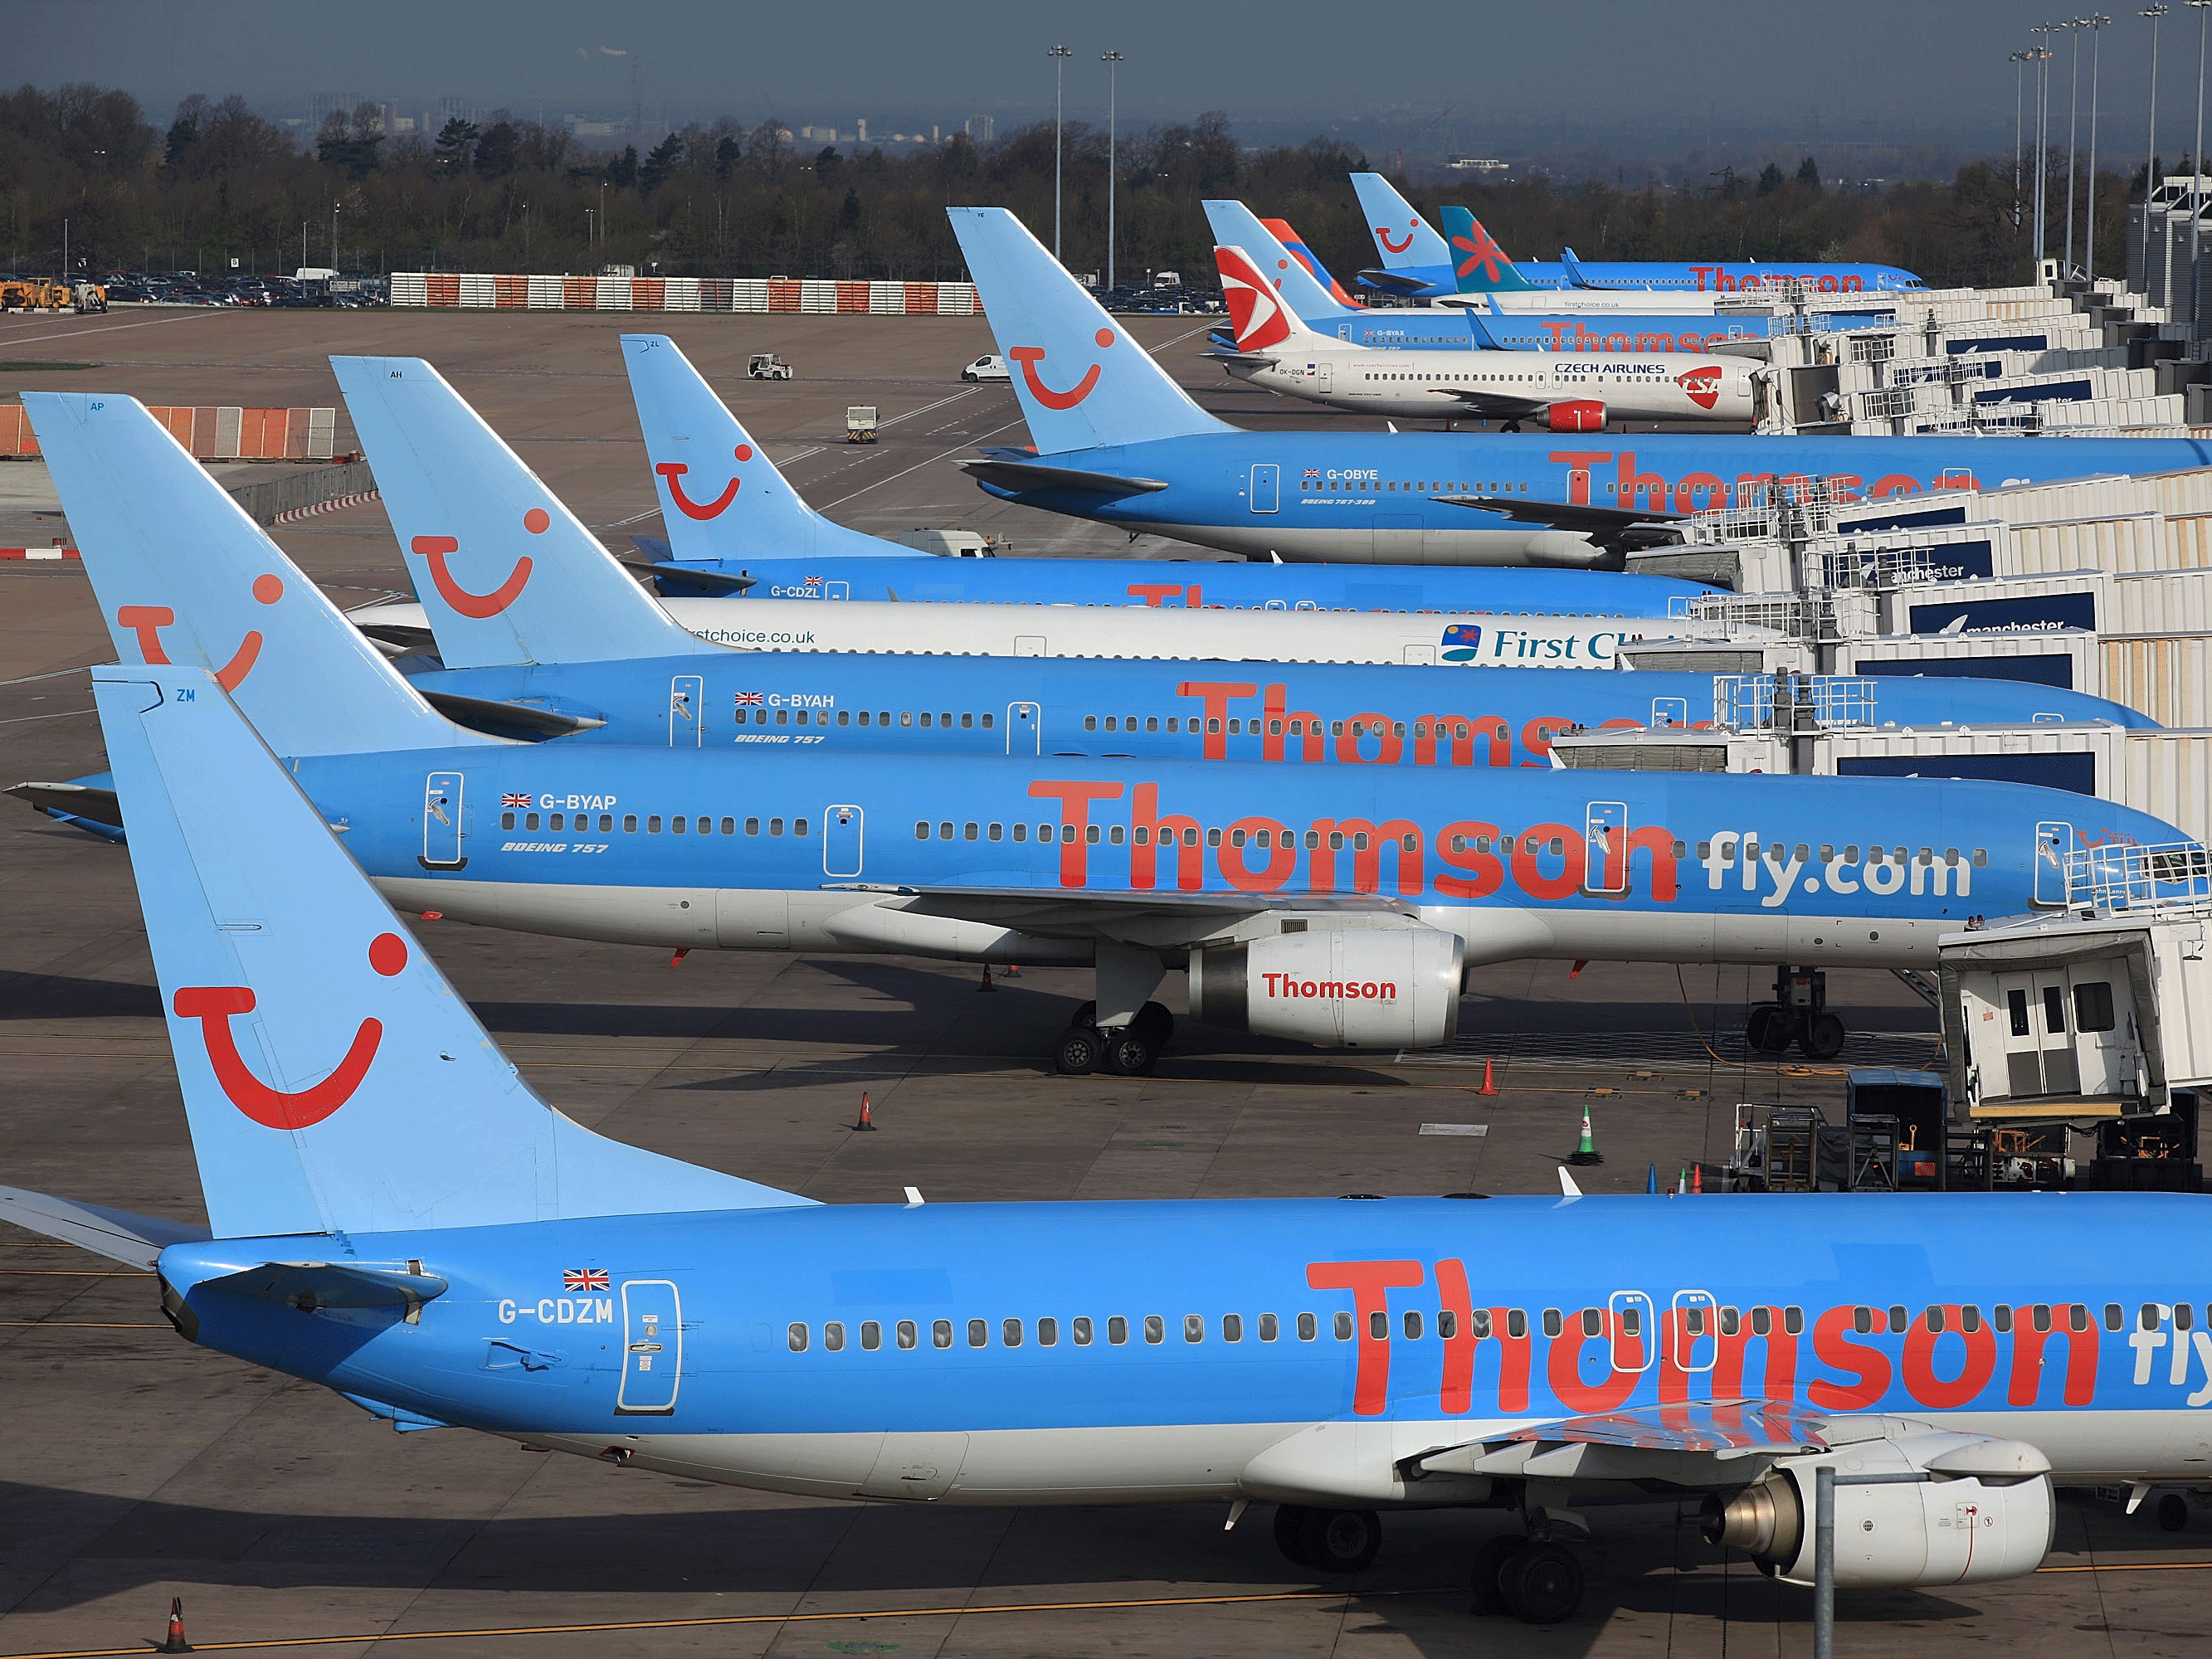 Thomson Airways planes at Manchester airport in 2010